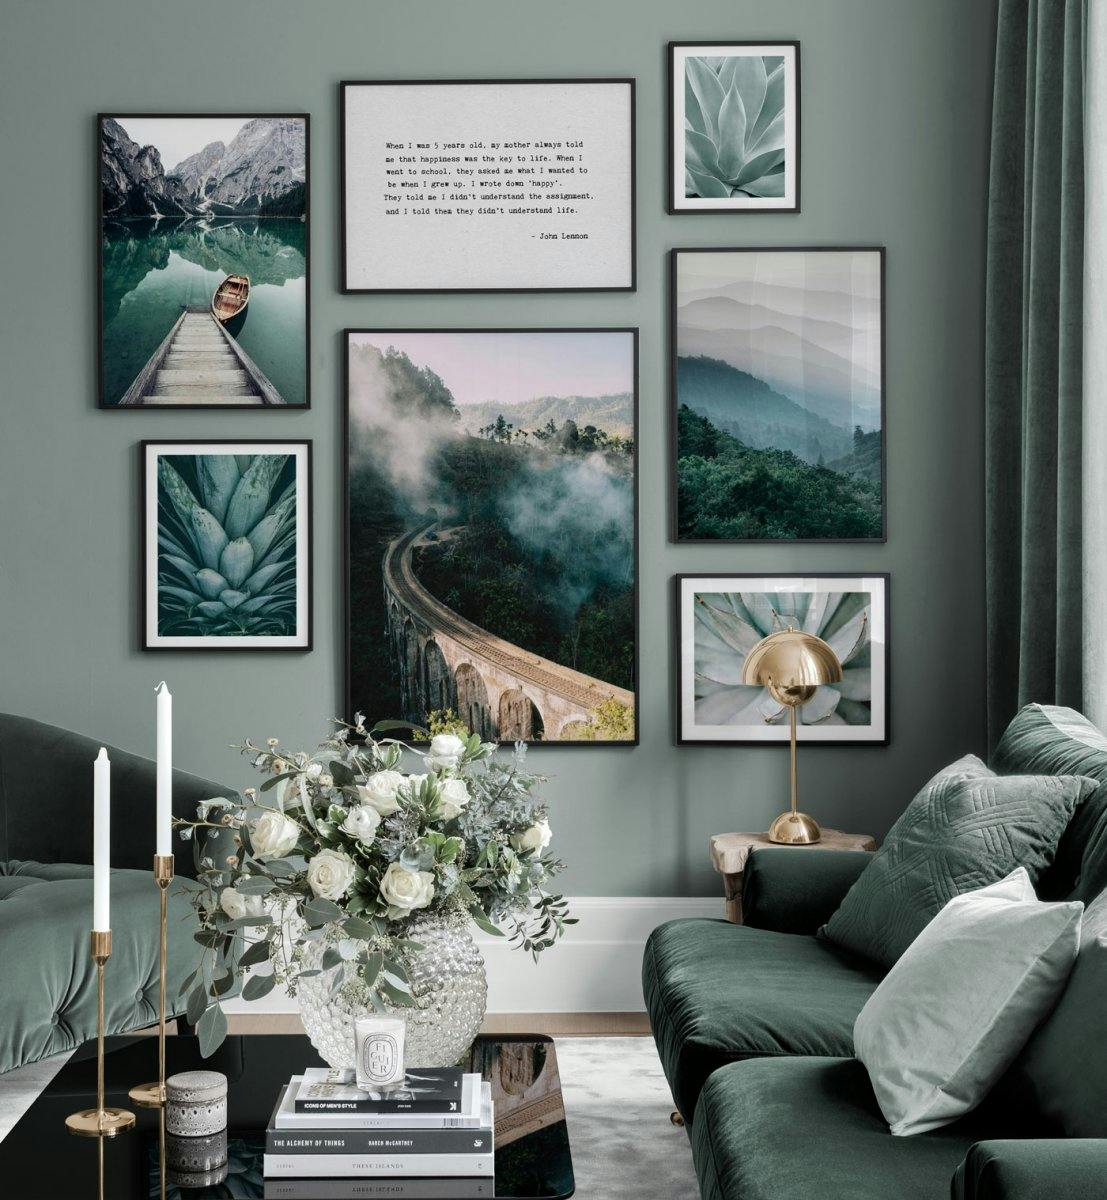 Green gallery wall with photo posters and quotes